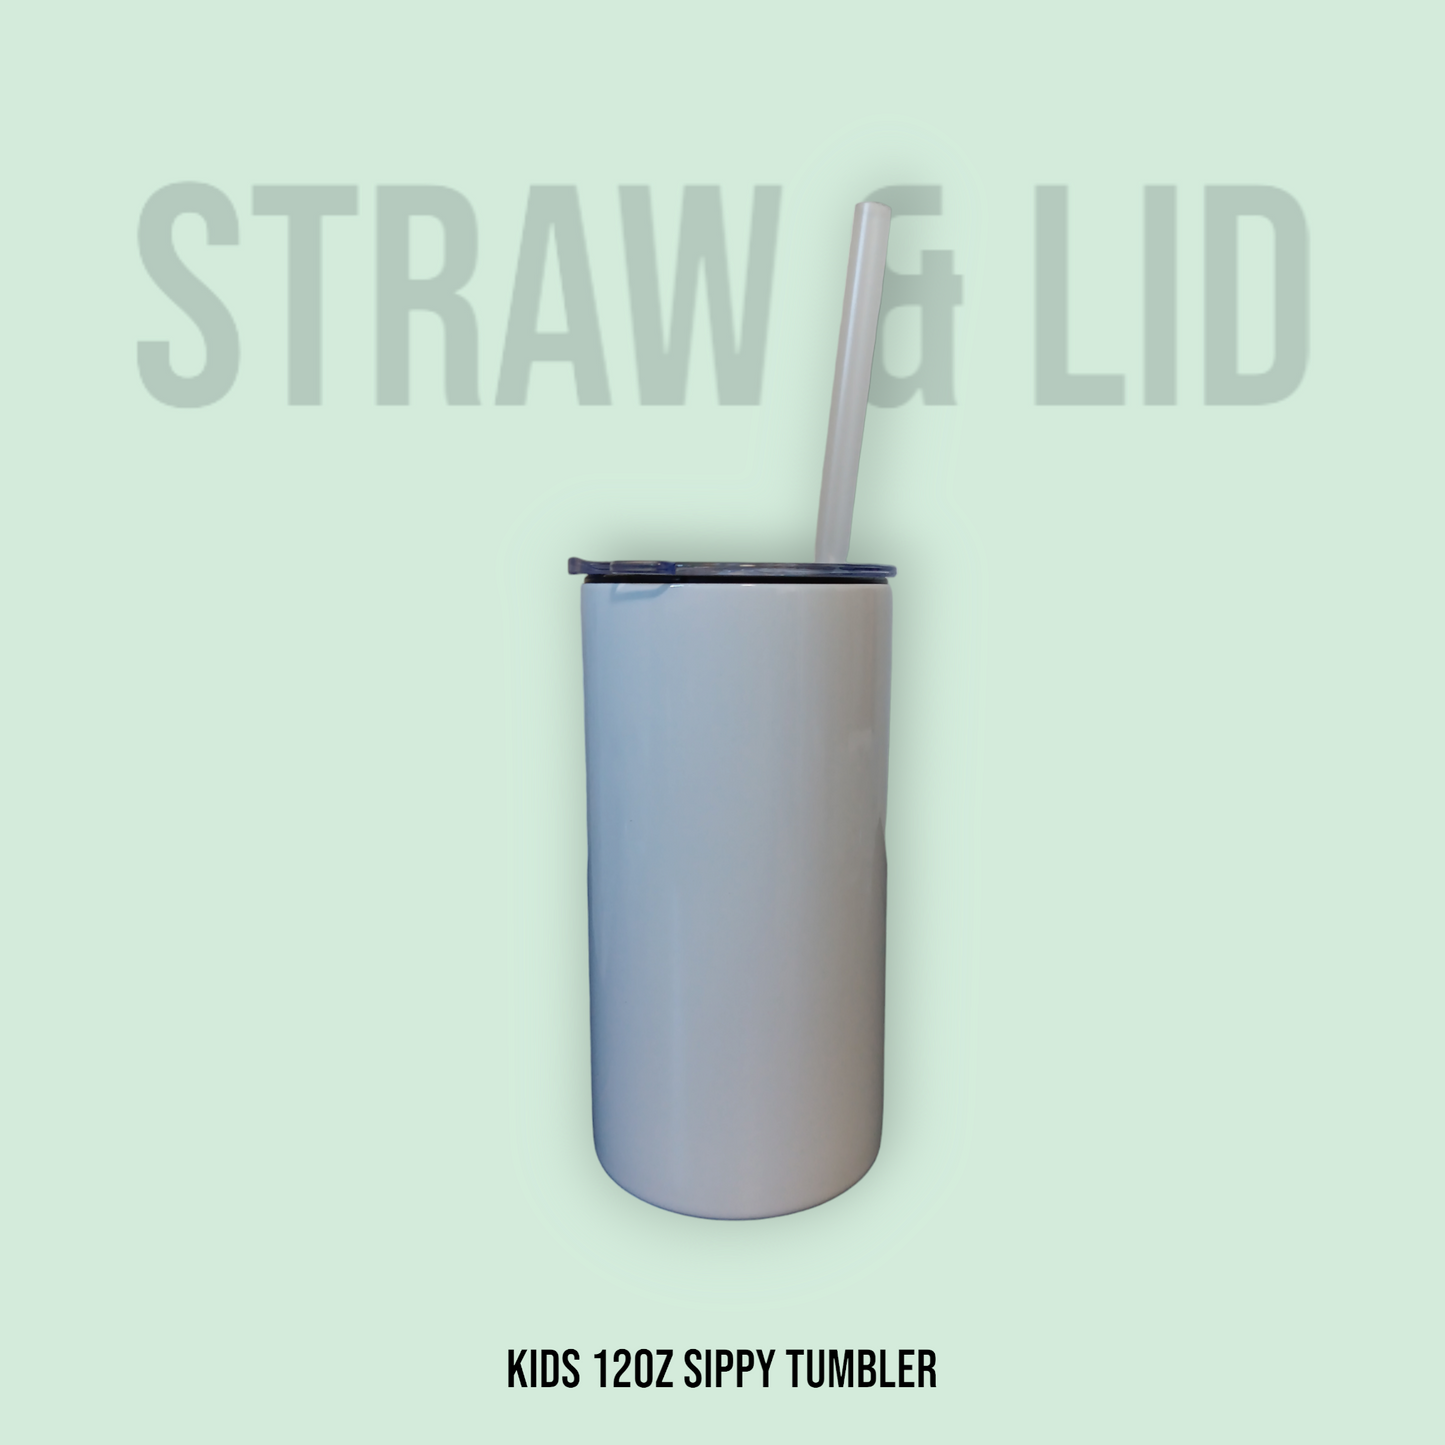 Create Your Own 12oz Kids Sippy Tumbler (w/ two attachments!)